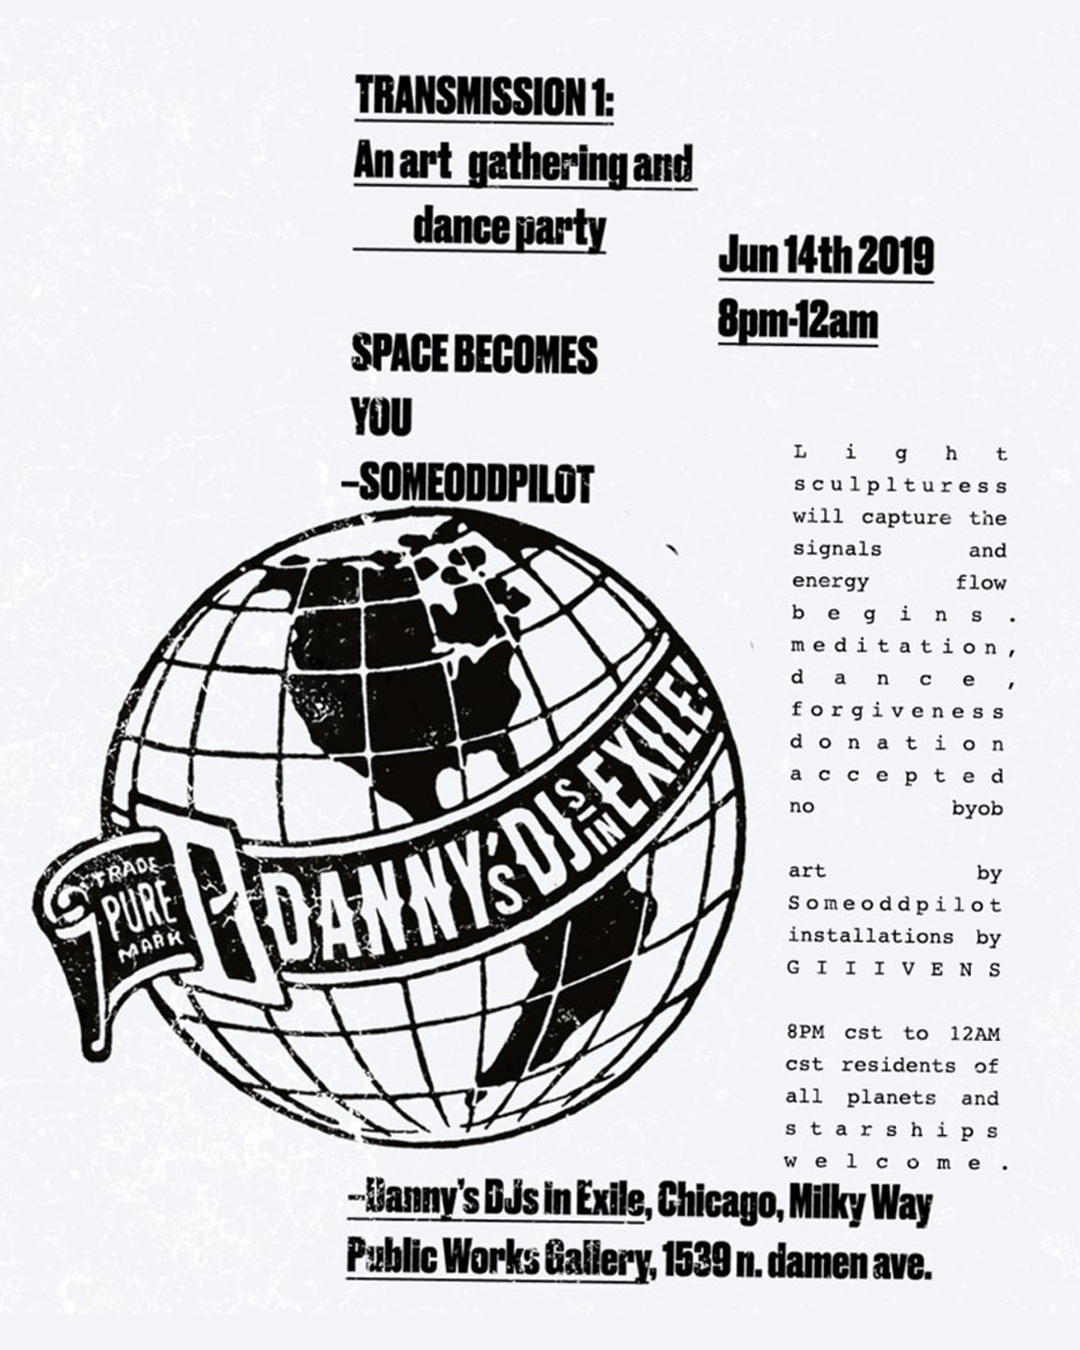 Transmission 1: An art gathering and dance party @ Danny’s DJs In Exile